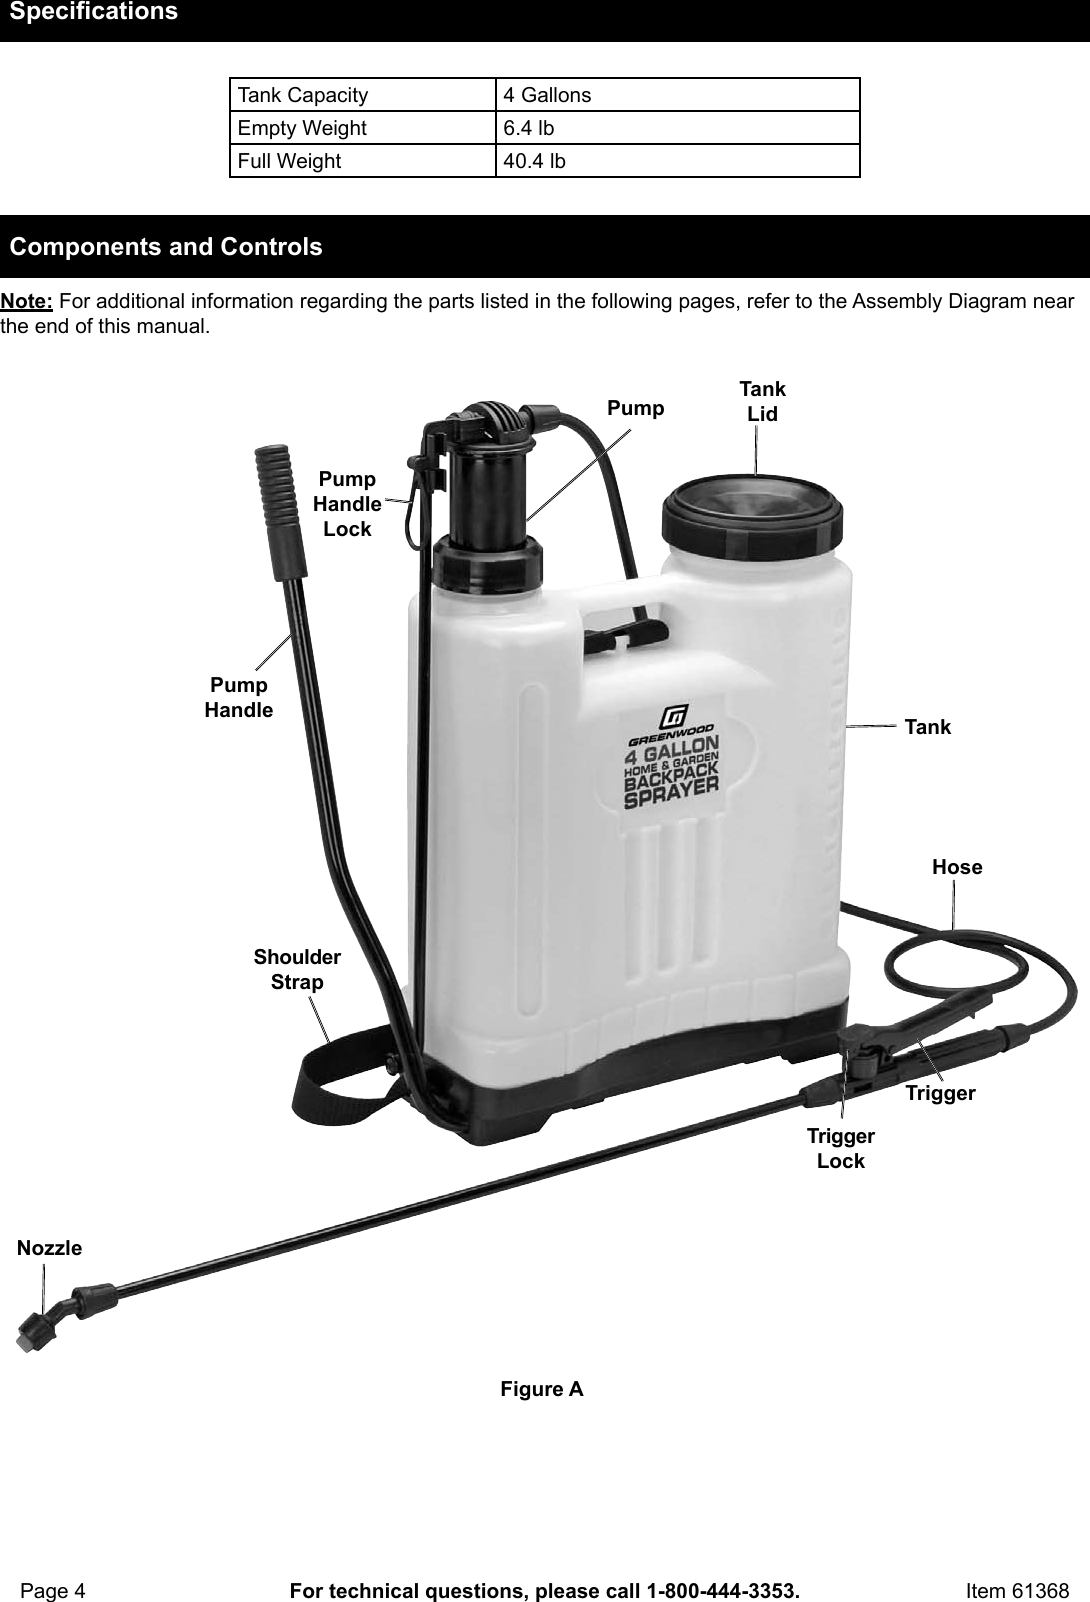 Page 4 of 12 - Harbor-Freight Harbor-Freight-4-Gal-Backpack-Sprayer-Product-Manual-  Harbor-freight-4-gal-backpack-sprayer-product-manual